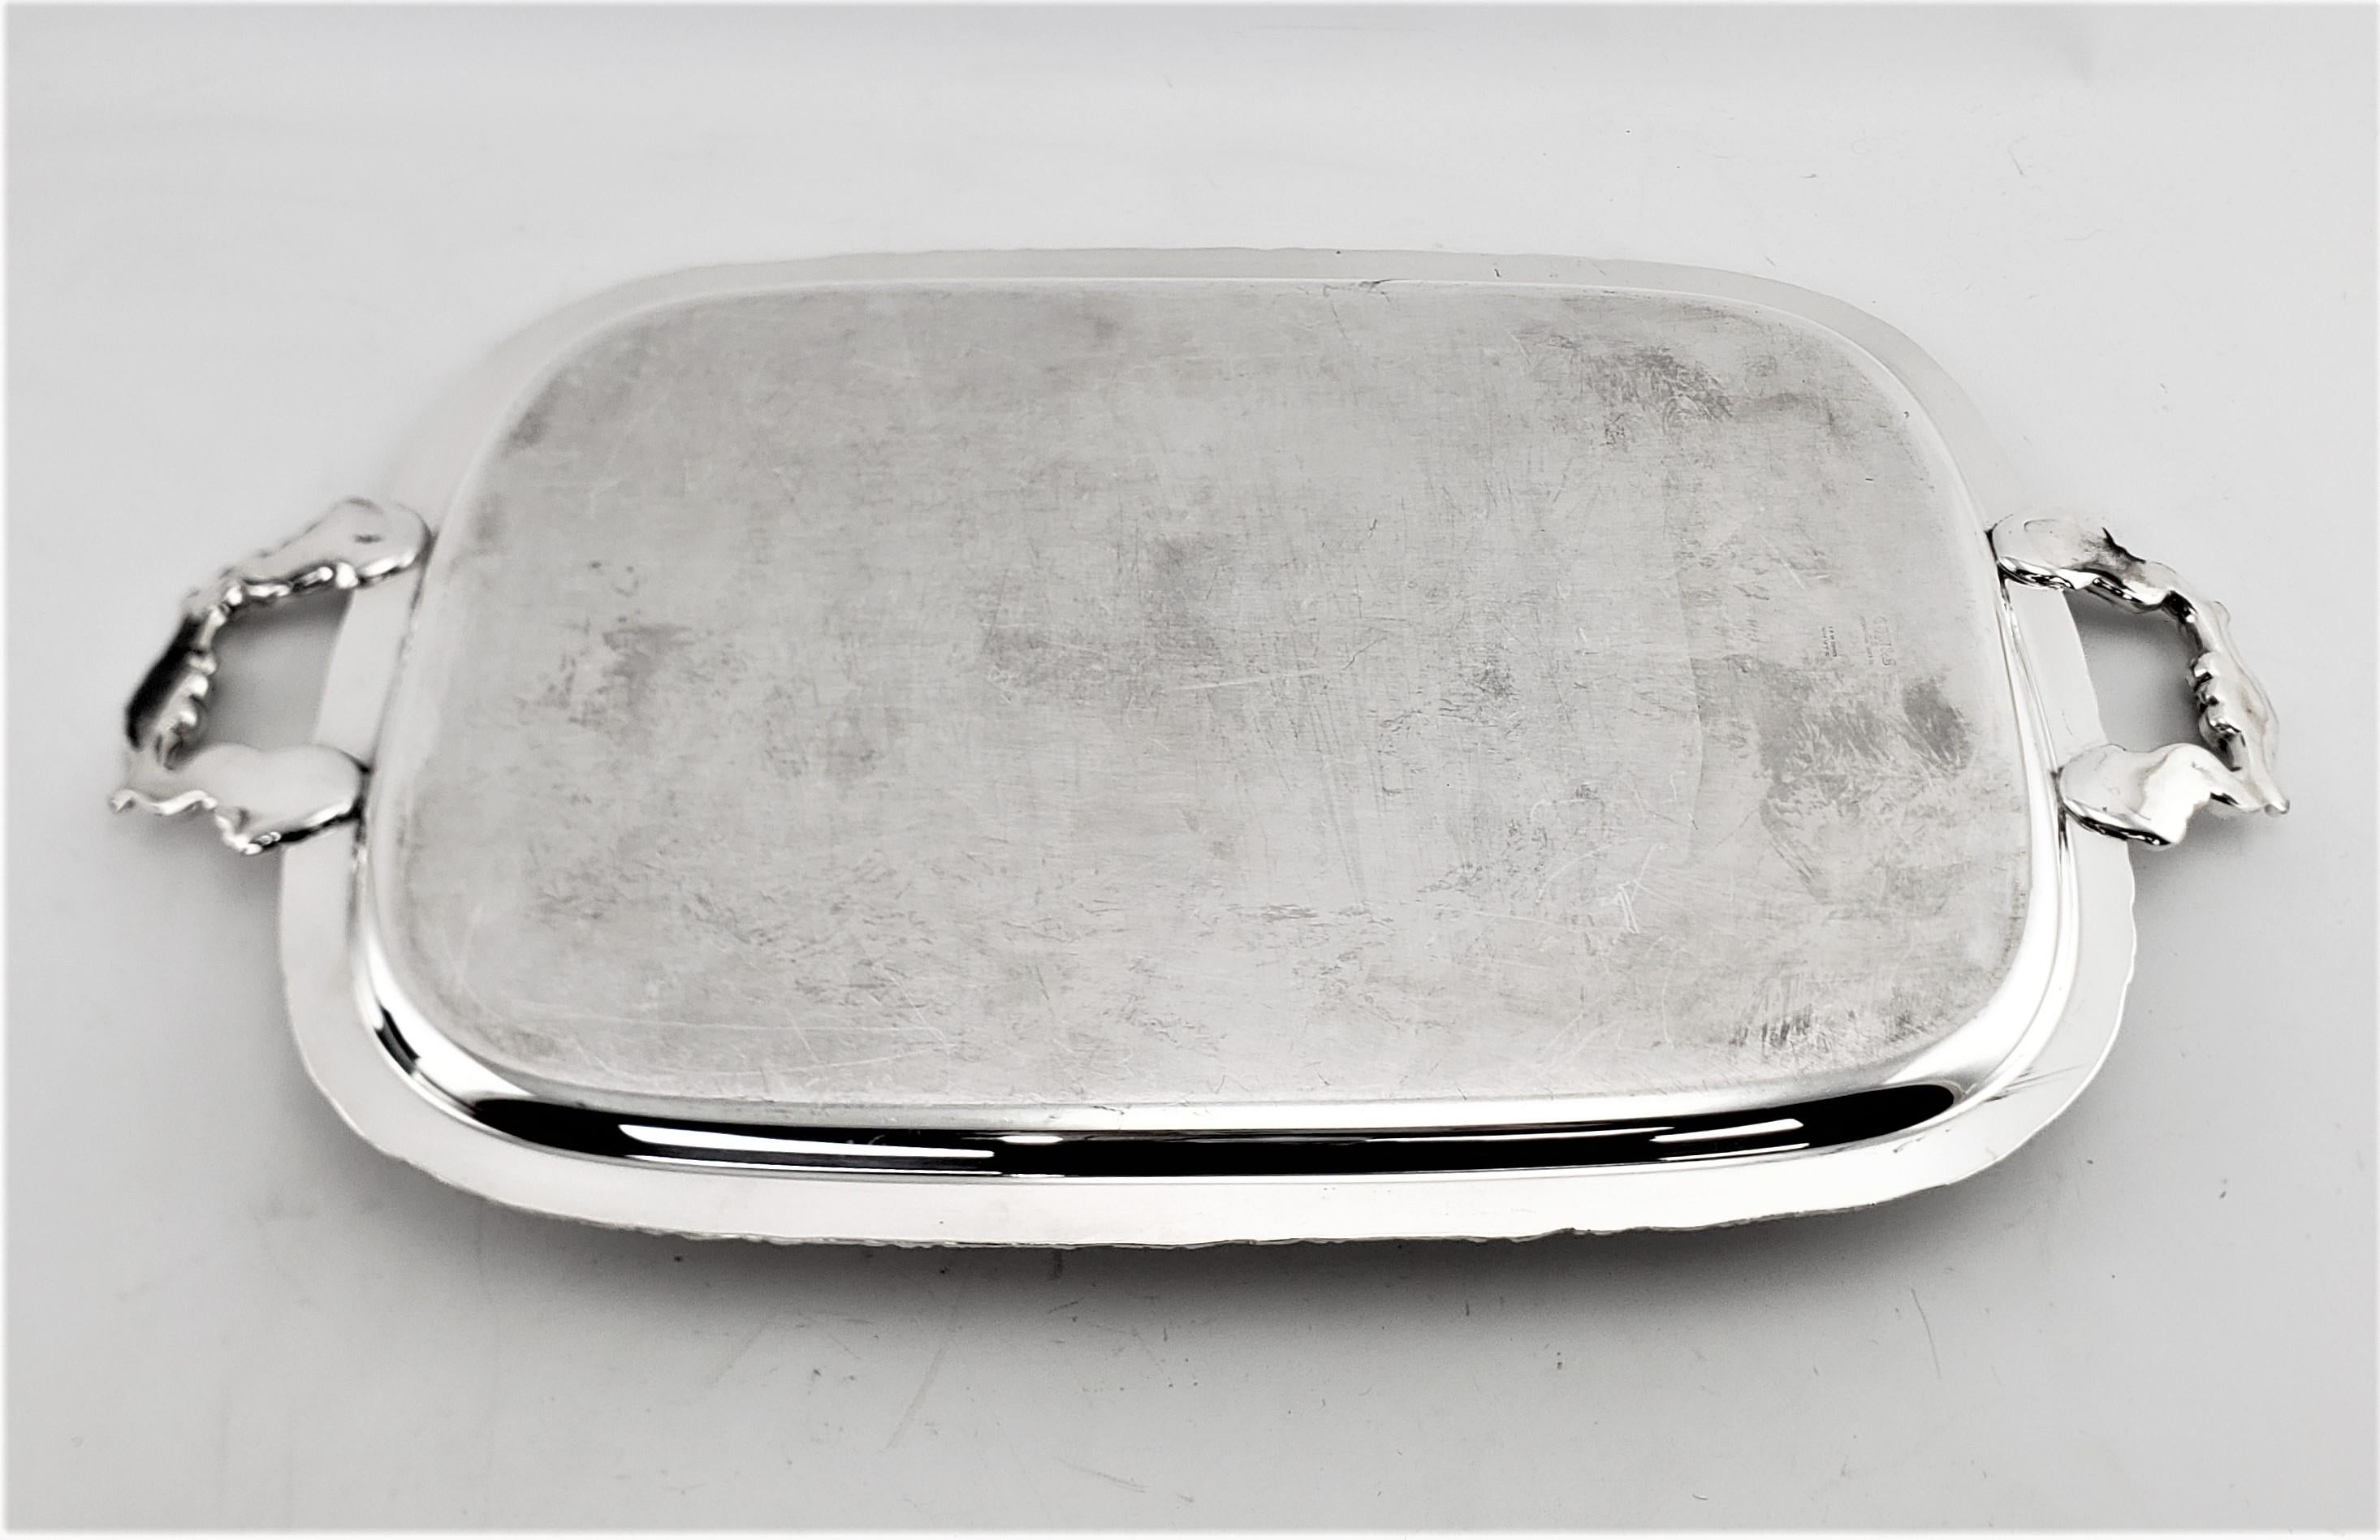 Large Antique English Silver Plated Serving Tray with Ornate Handles & Engraving 6